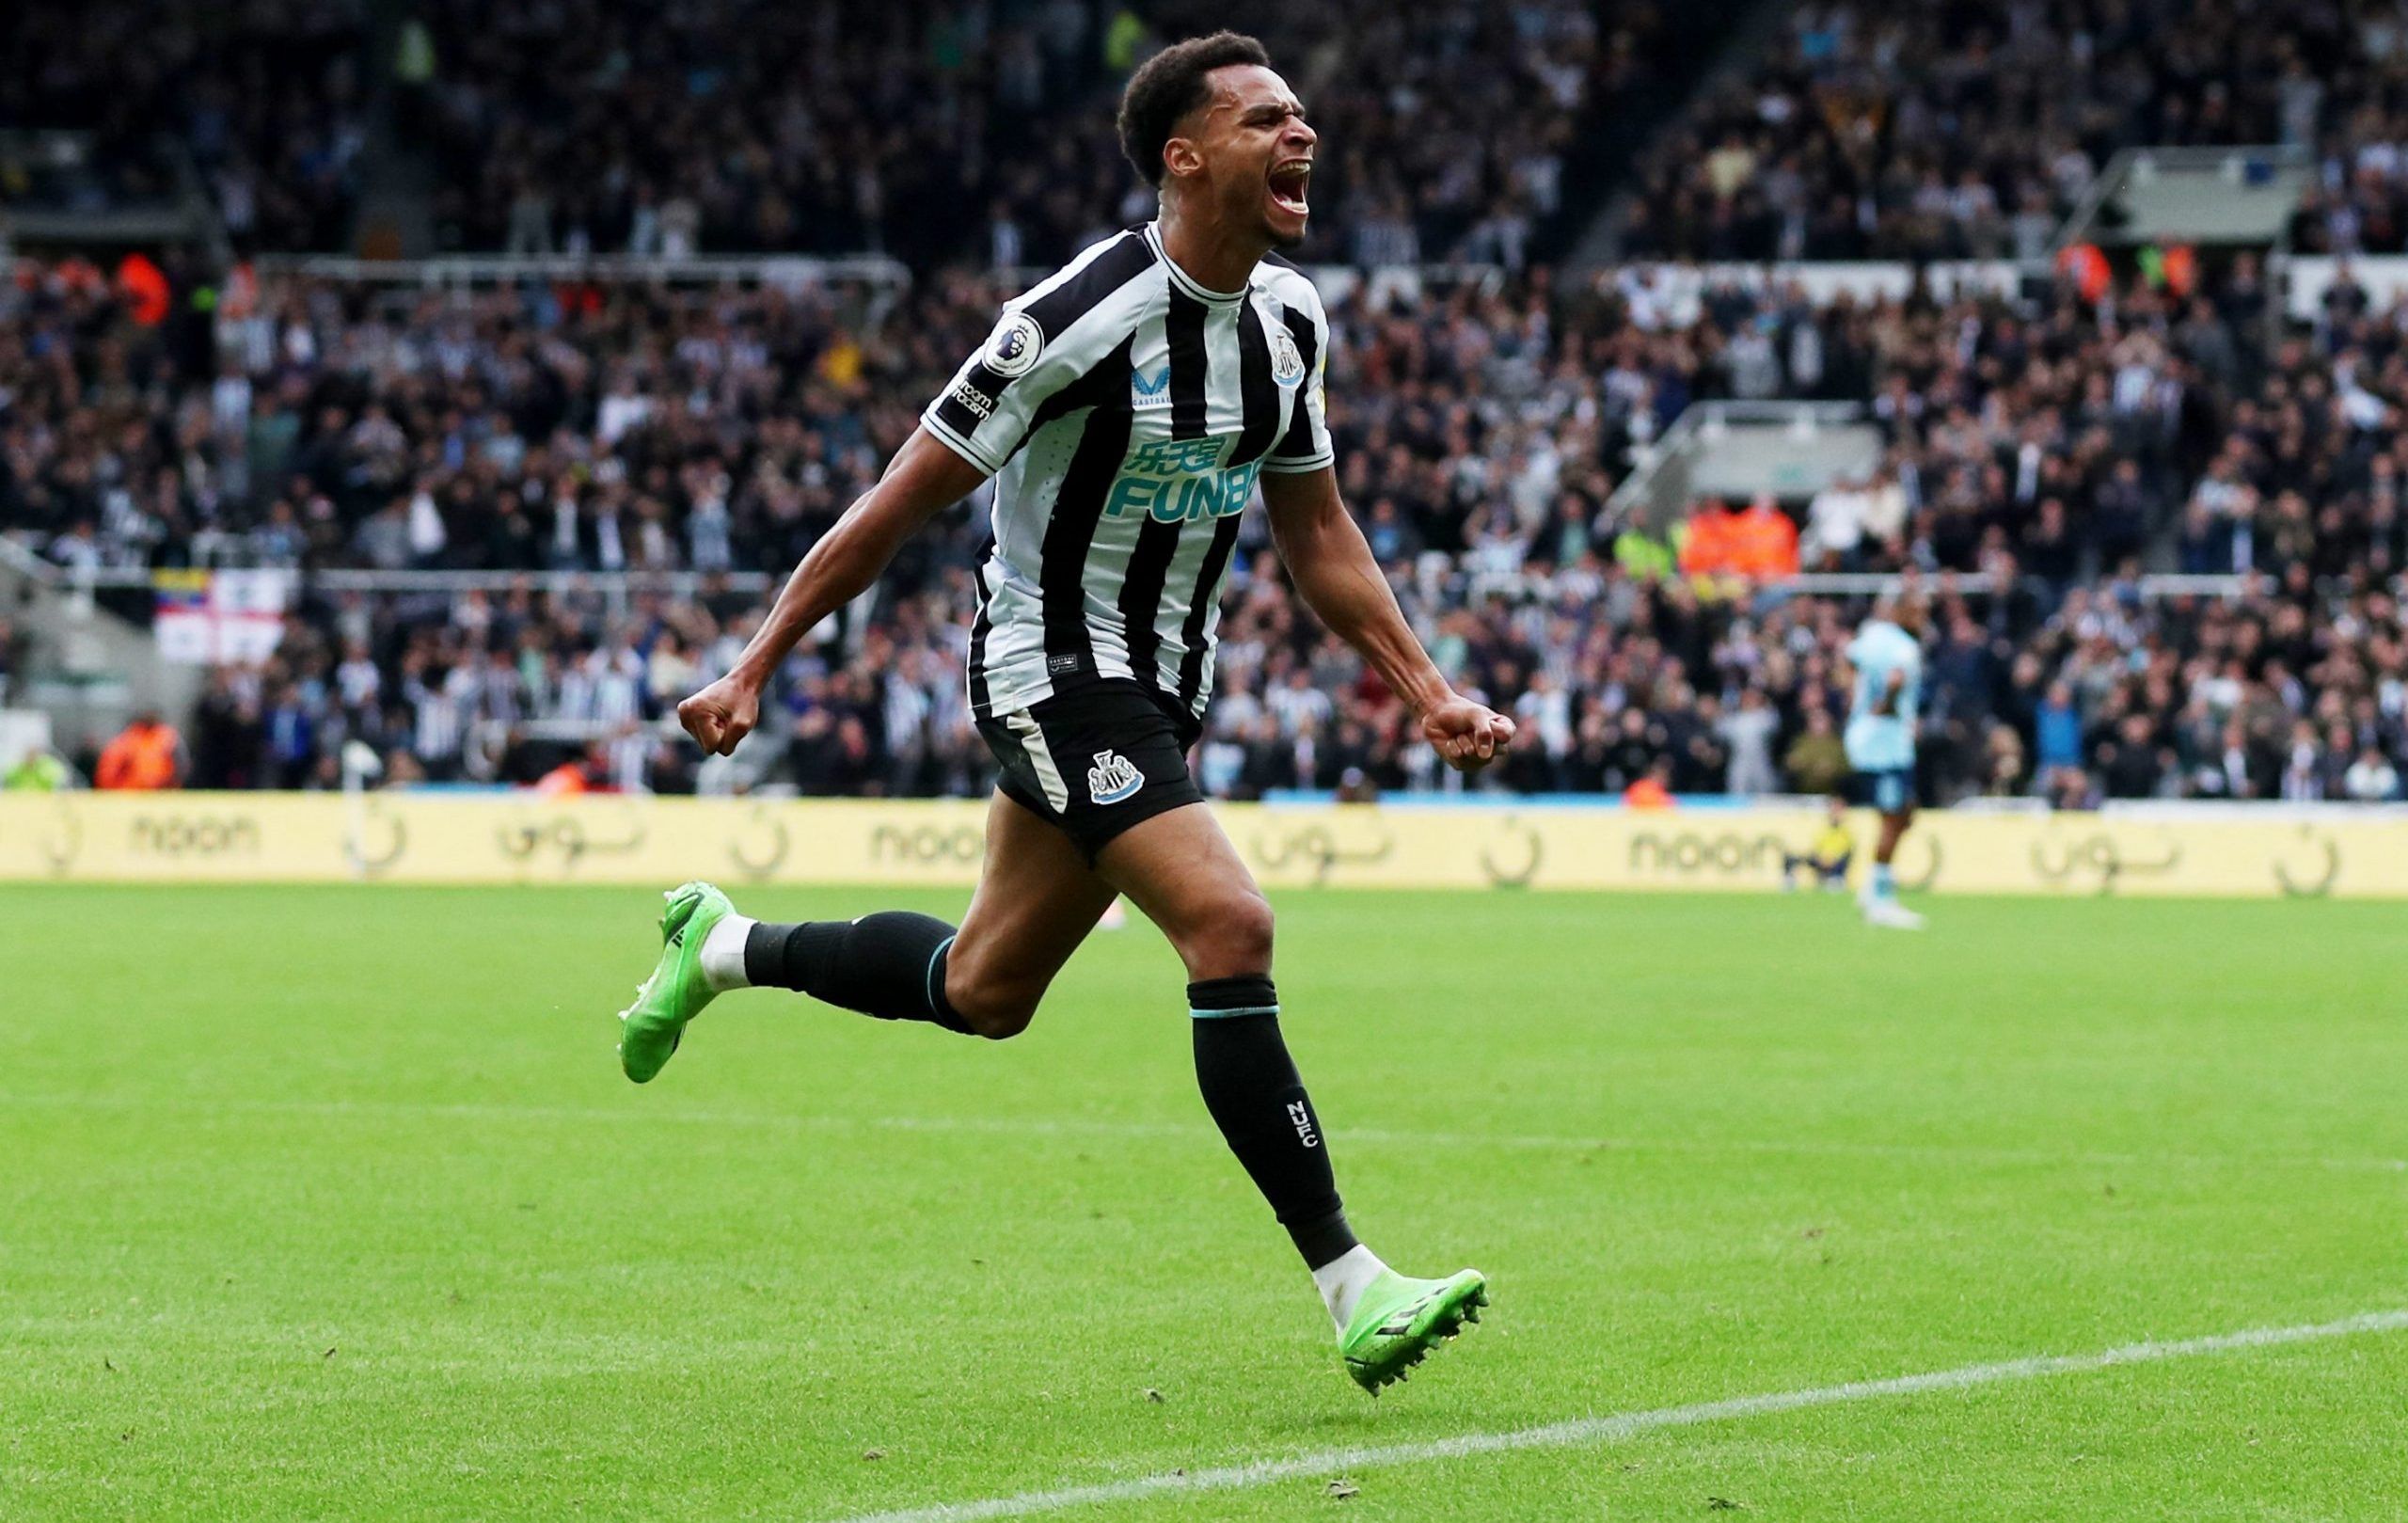 Soccer Football - Premier League - Newcastle United v Brentford - St James' Park, Newcastle, Britain - October 8, 2022 Newcastle United's Jacob Murphy celebrates scoring their second goal REUTERS/Scott Heppell EDITORIAL USE ONLY. No use with unauthorized audio, video, data, fixture lists, club/league logos or 'live' services. Online in-match use limited to 75 images, no video emulation. No use in betting, games or single club /league/player publications.  Please contact your account representati